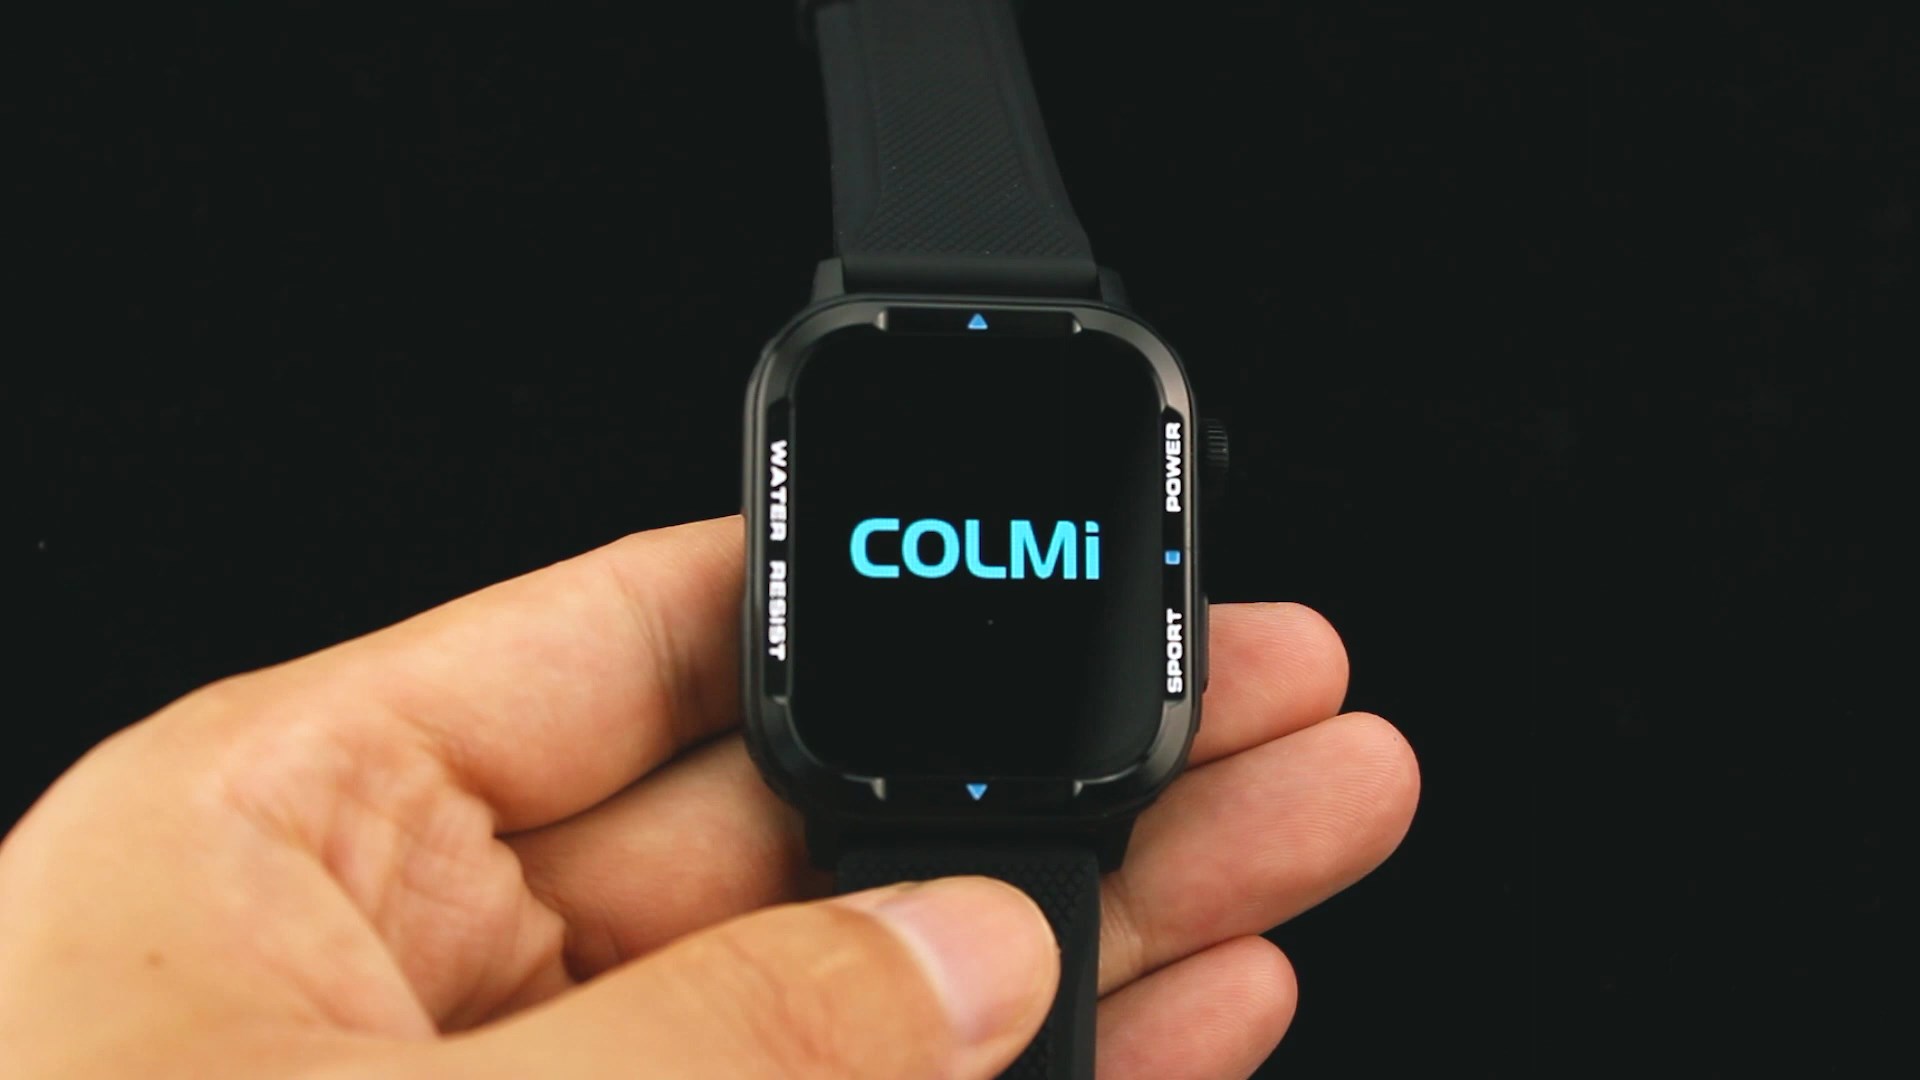 Colmi M41 Smartwatch At a Price Not Exceeding $25